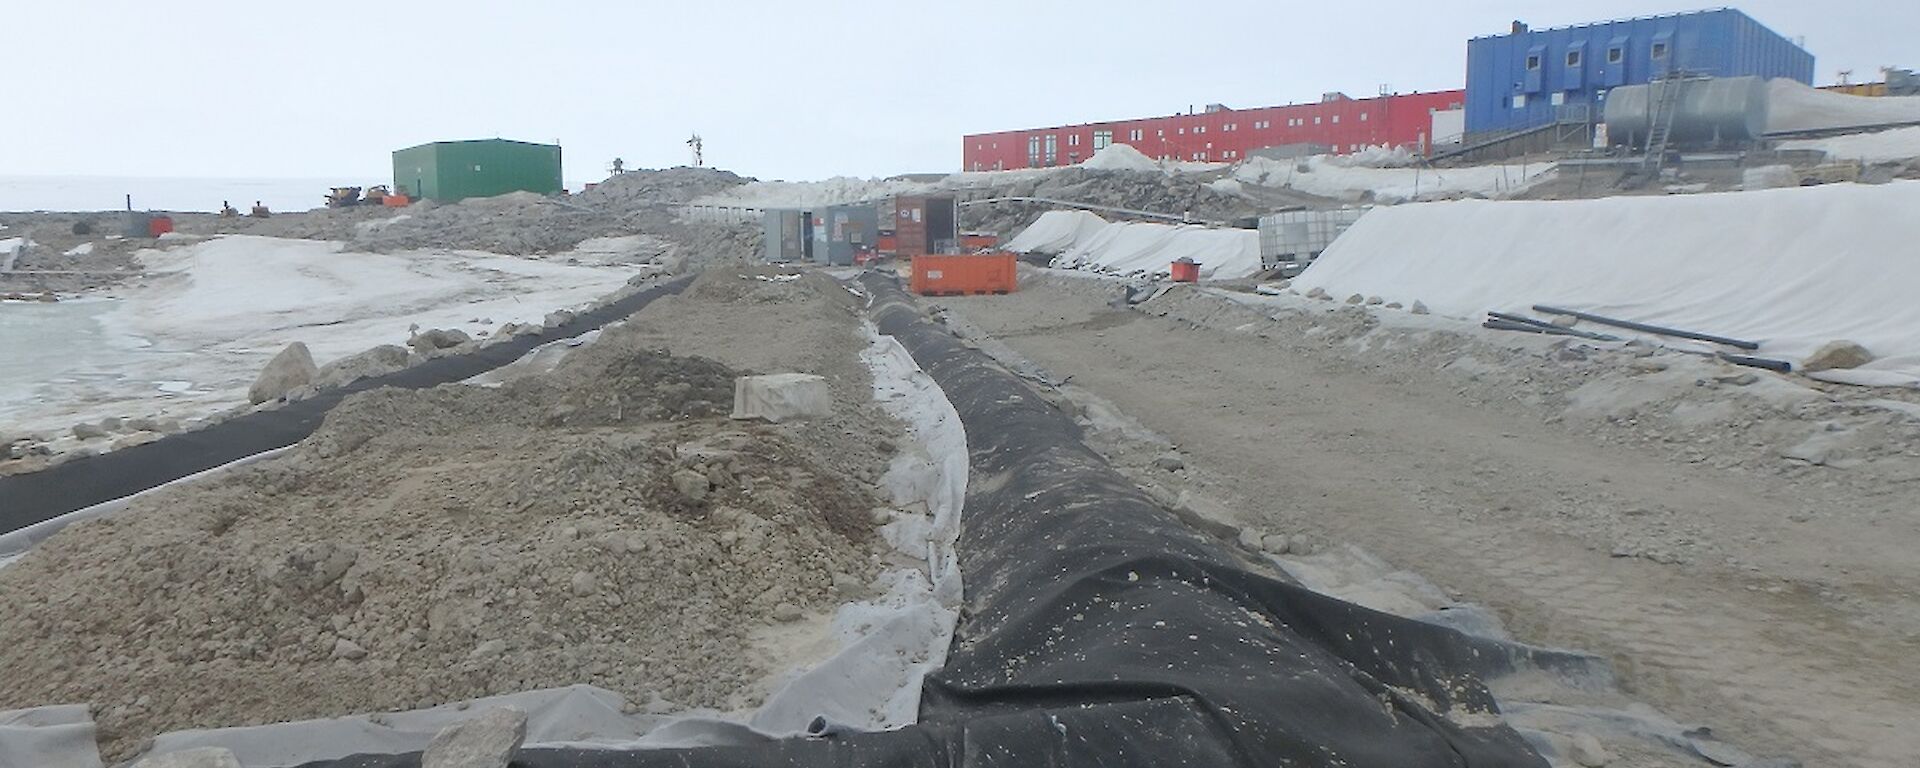 The Casey remediation site before being covered